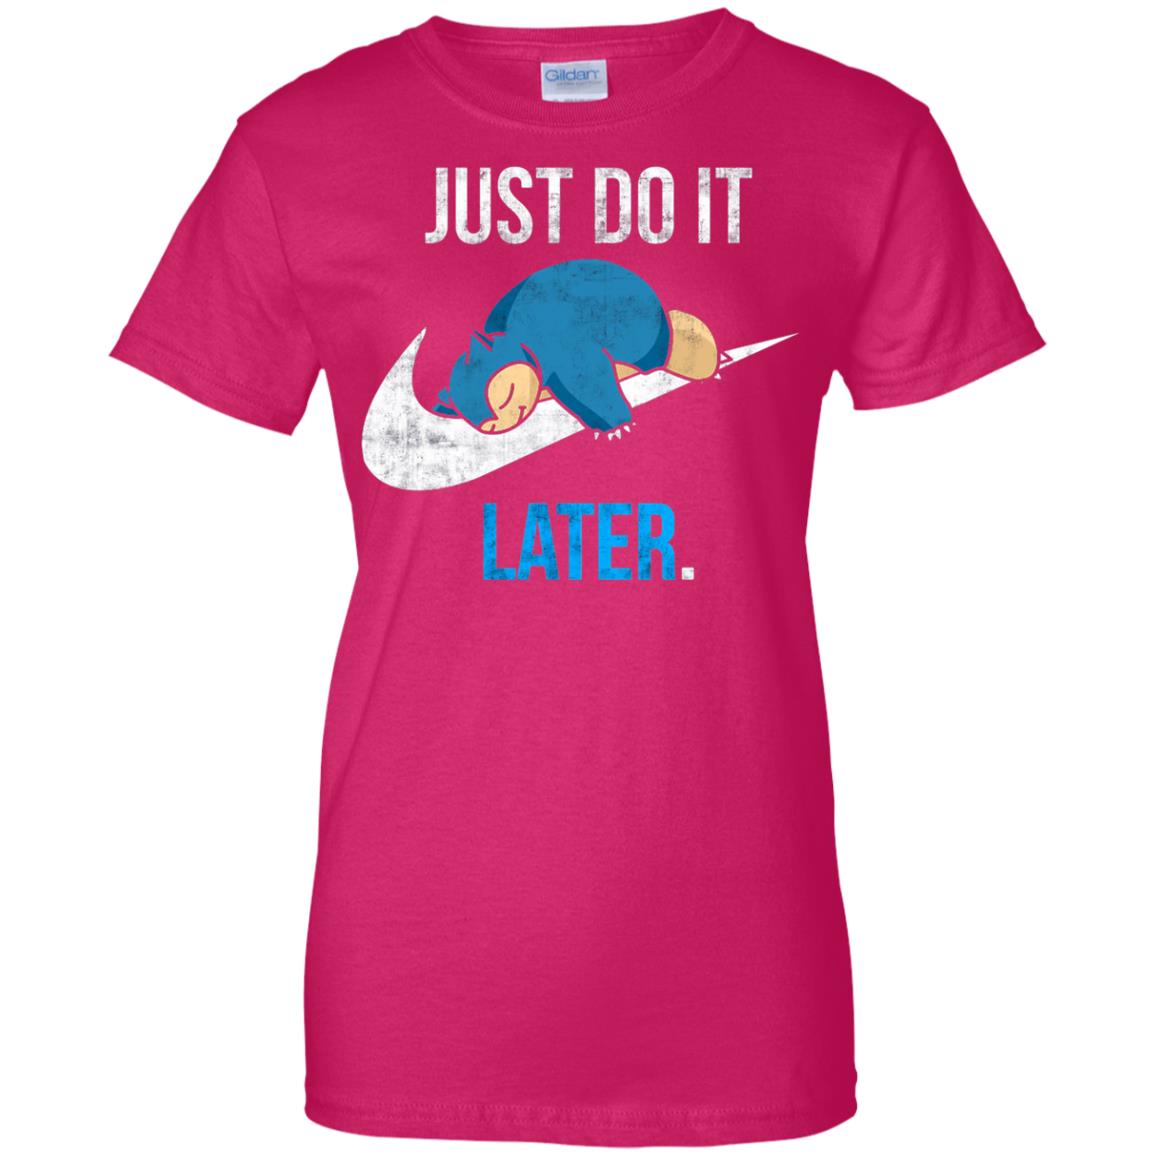 just do it later womens t shirt - lady t shirt - pink heliconia